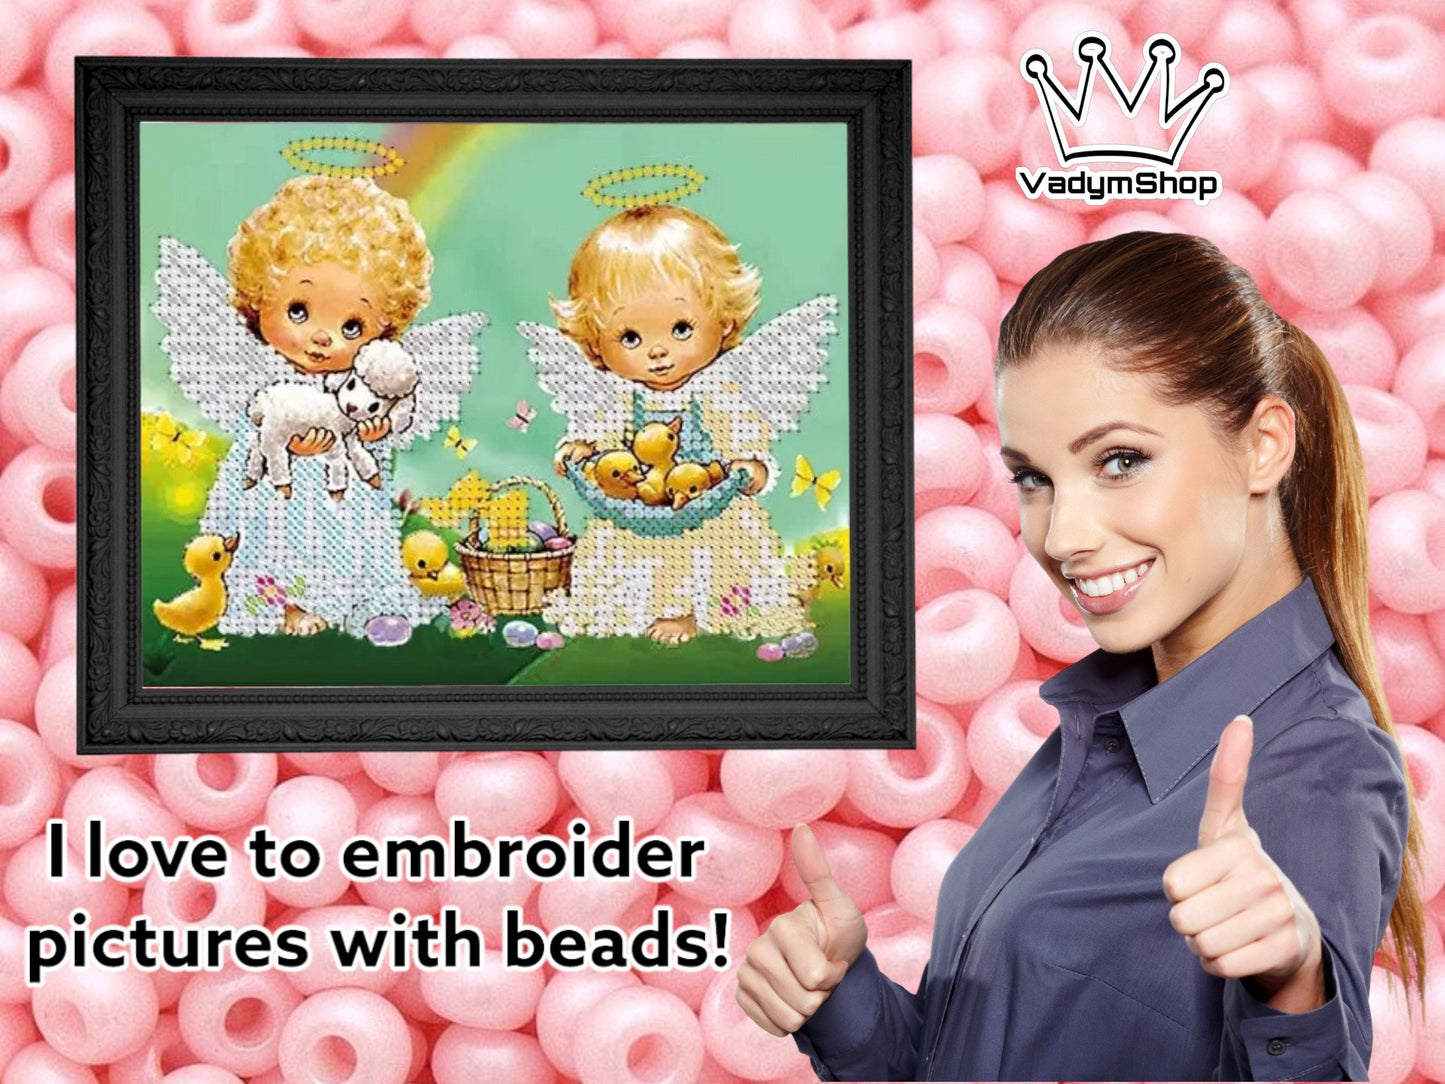 Bead embroidery kit "Angels". - VadymShop